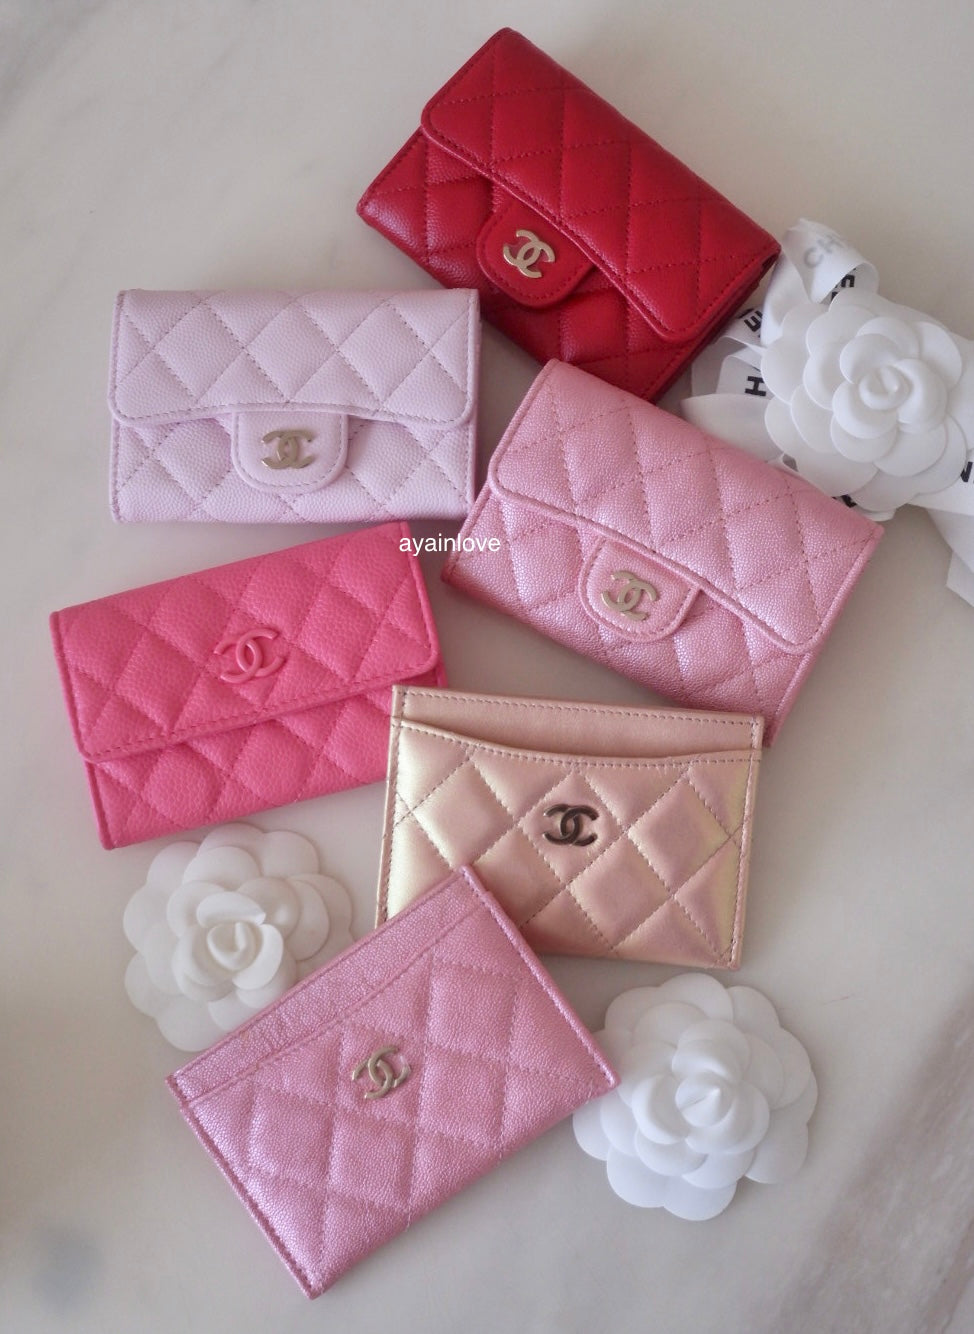 LOUIS VUITTON SLG COLLECTION (Small Leather Goods)